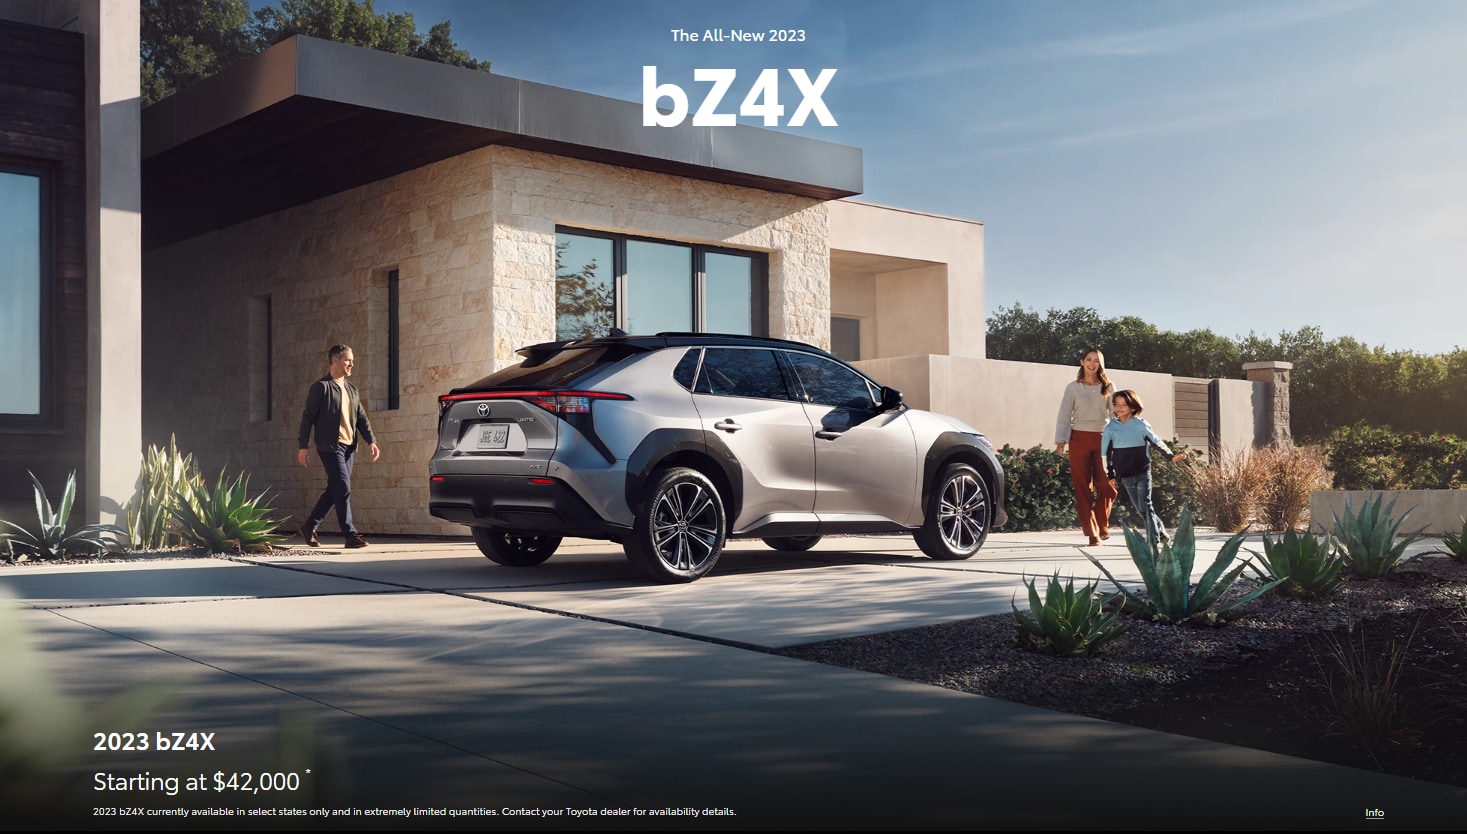 The All-New 2023 bZ4X. Starting at $42,000 *. 2023 bZ4X currently available in select states only and in extremely limited quantities. Contact your Toyota dealer for availability details. 